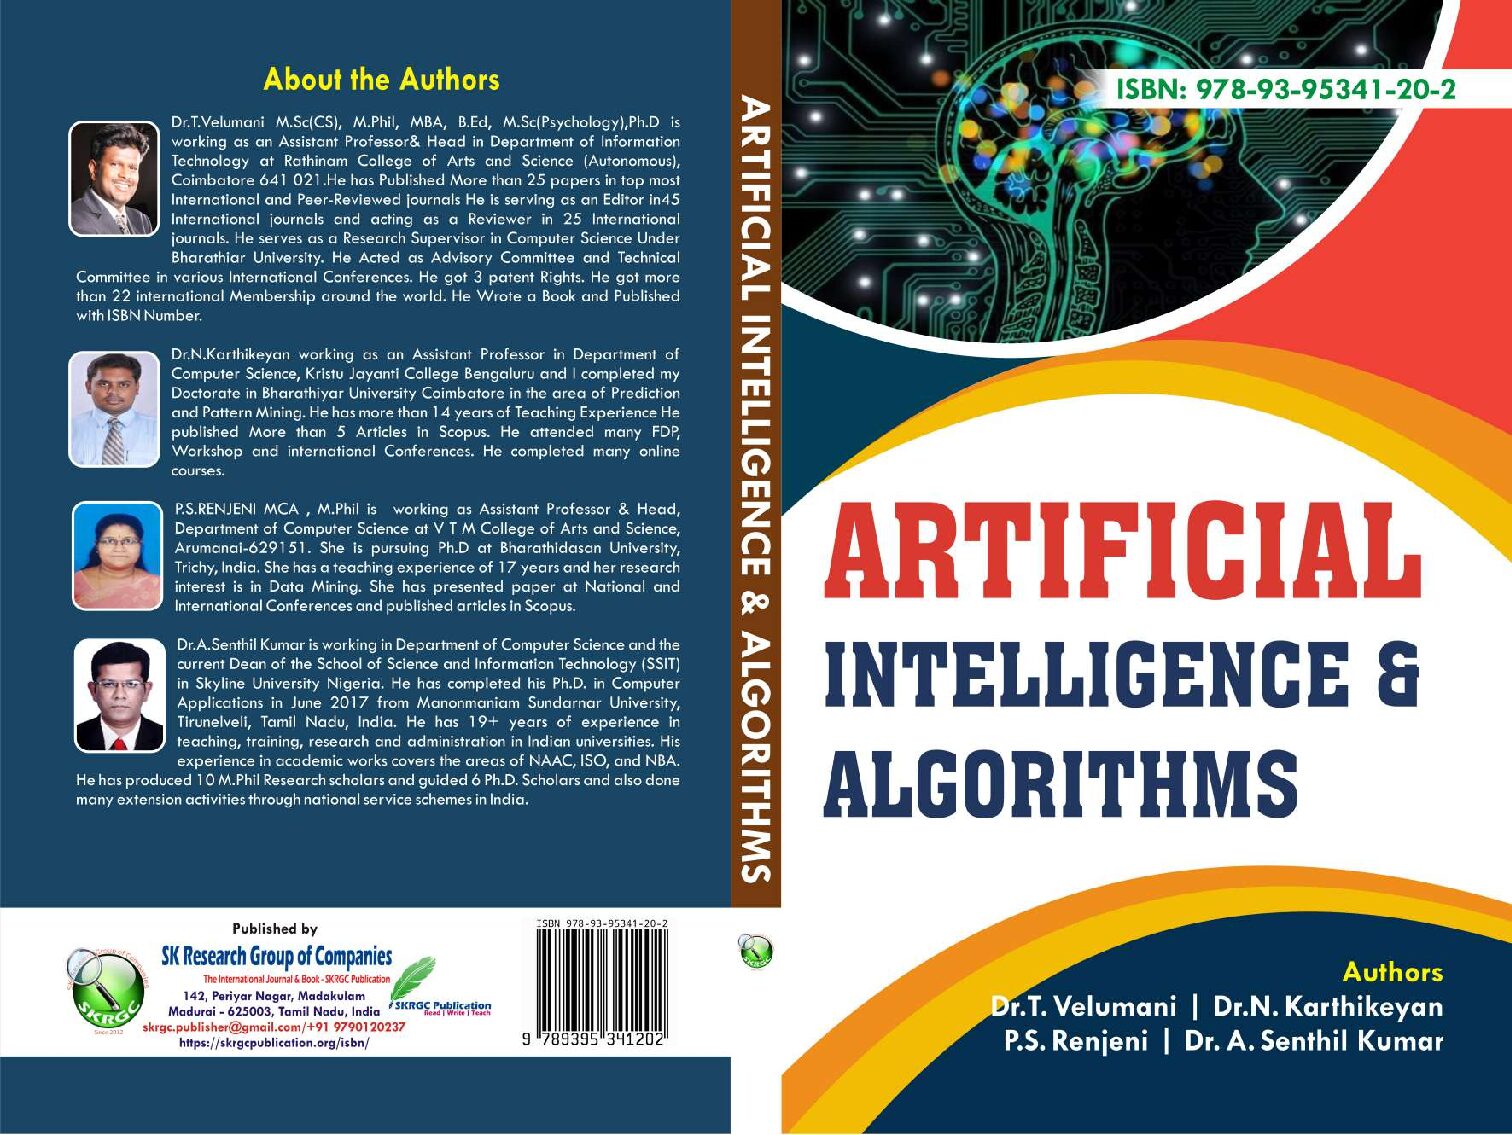 Artificial Intelligence and Algorithms